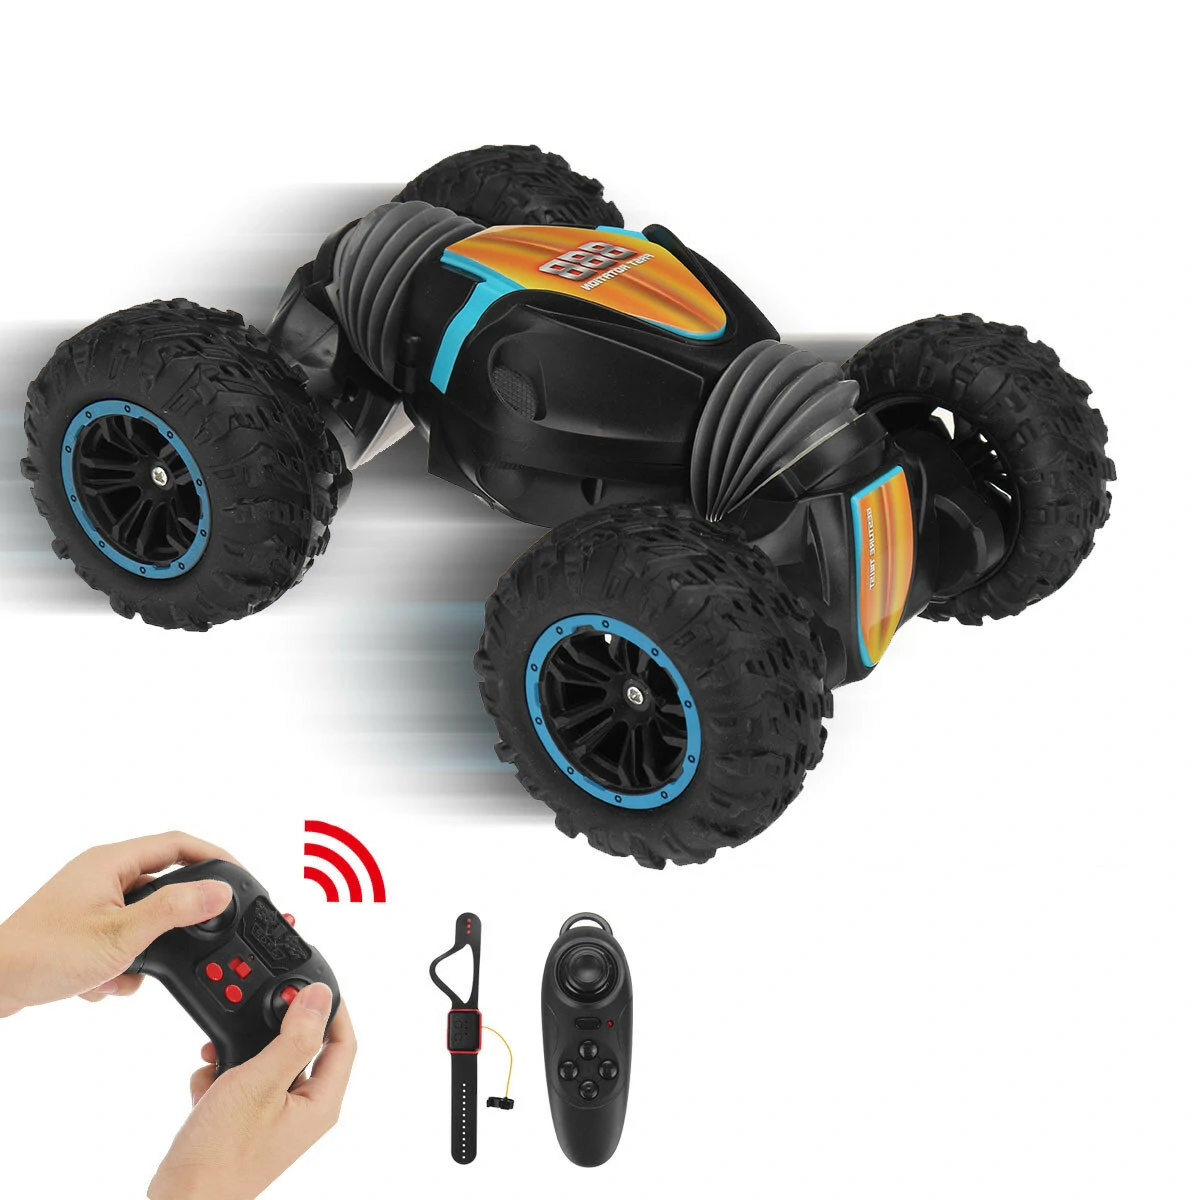 RC Stunt Car 2.4G 4WD Watch Induction Gesture Control Deformation Twisting 360° Spin Off-Road Kids Children Toys - Blue Double Remote Control